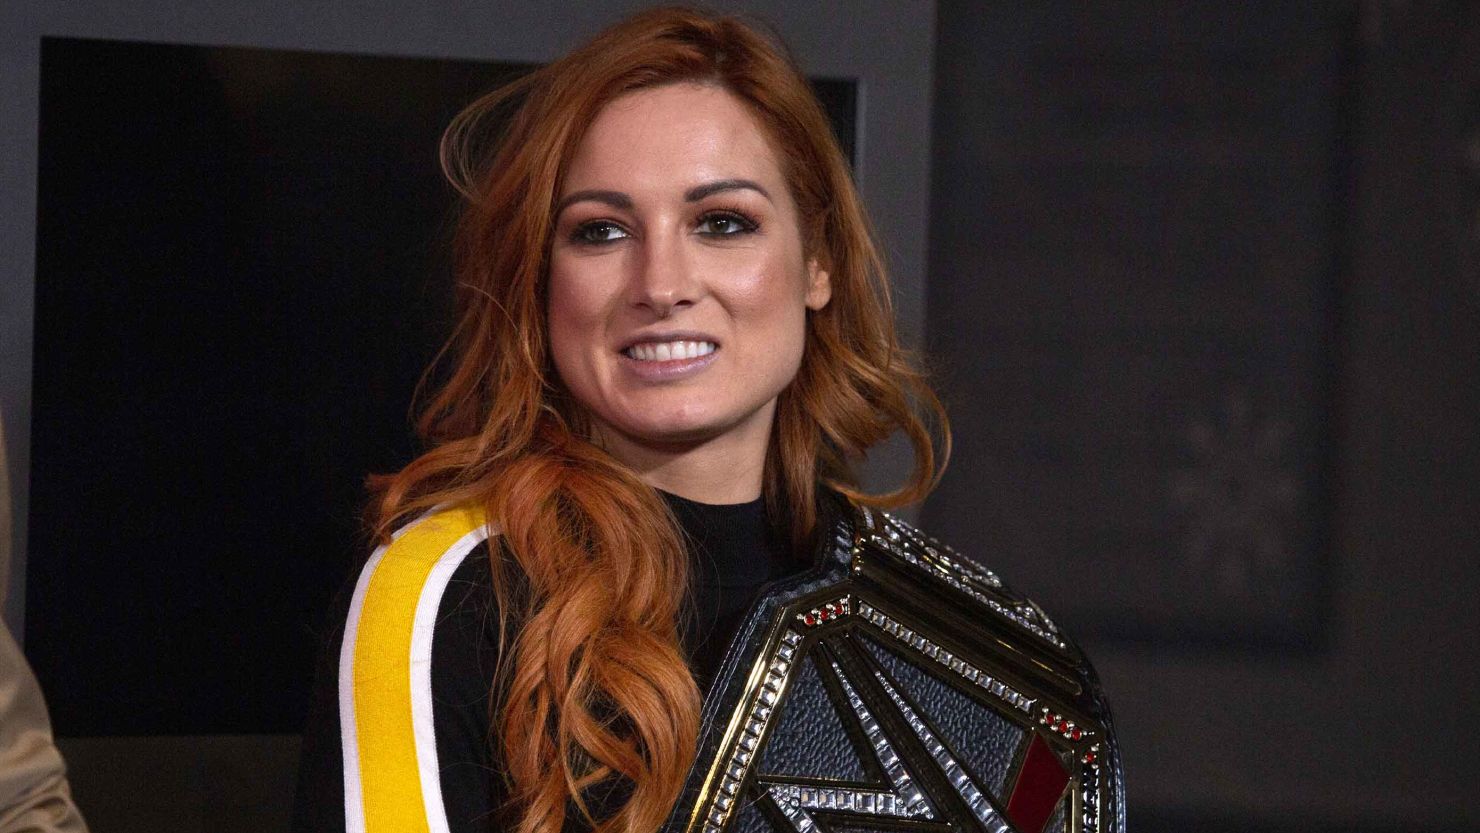 Becky Lynch celebrates Wrestlemania 35 at The Empire State Building.